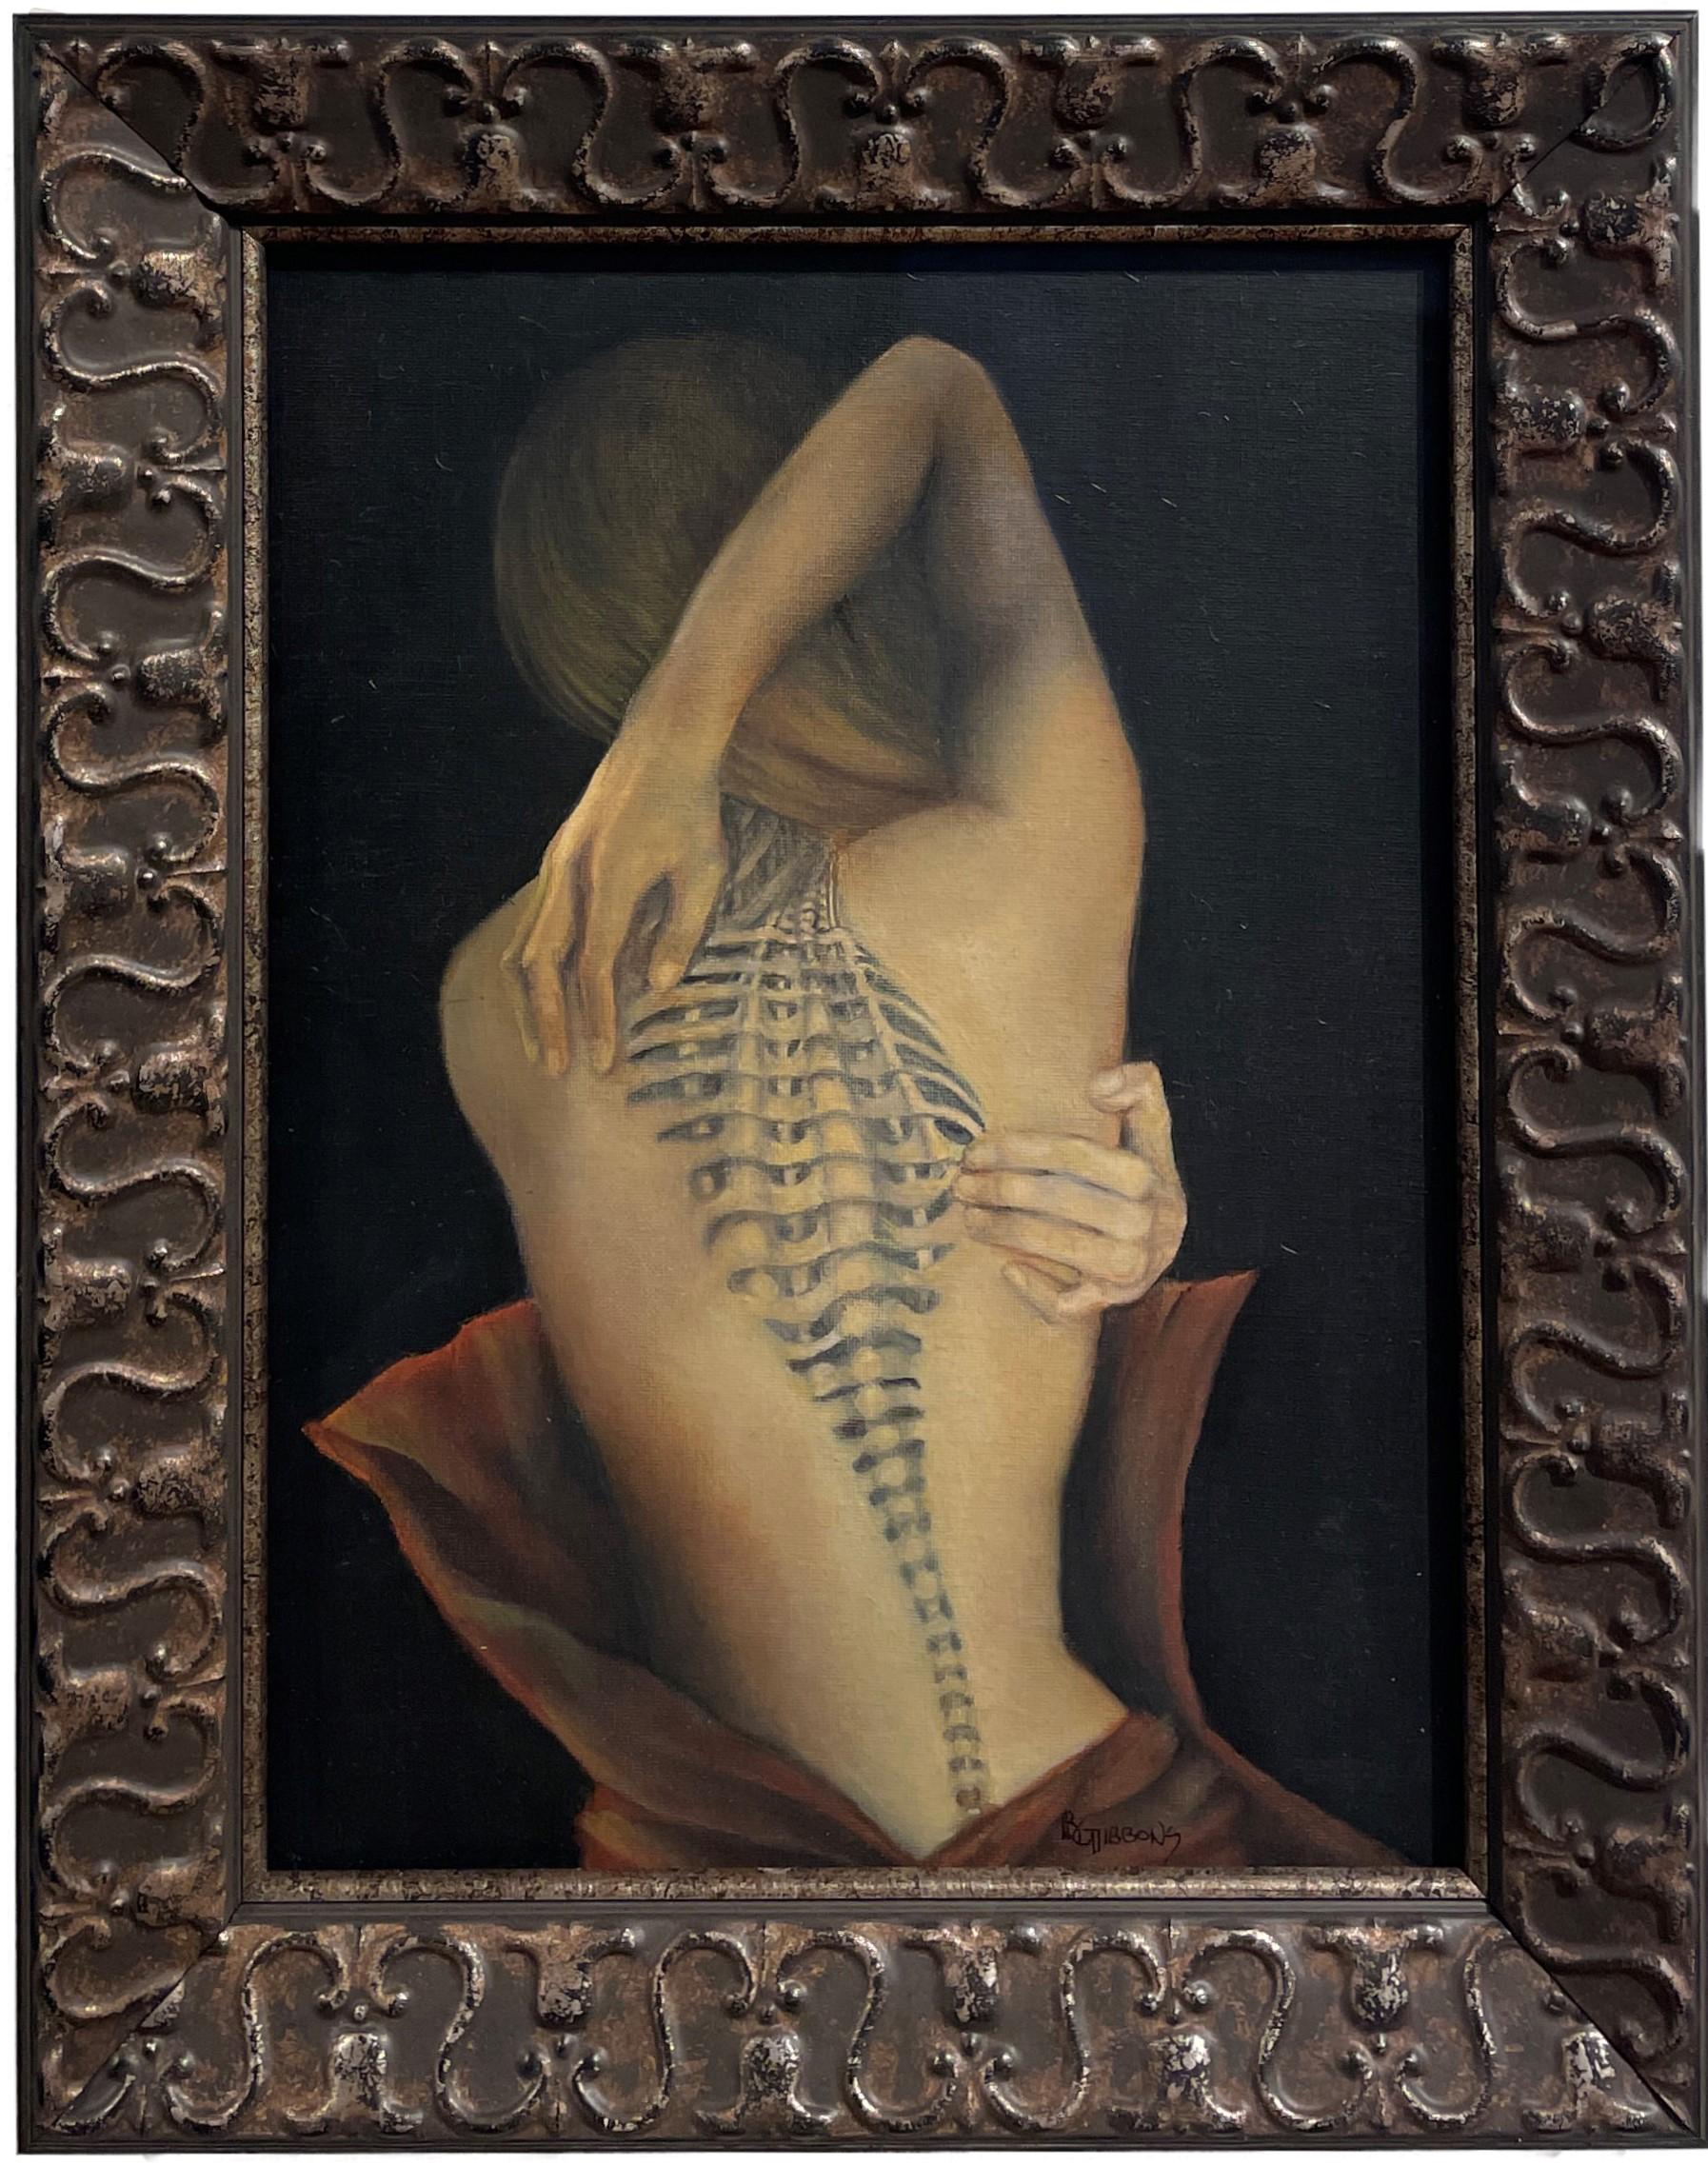 Richard Gibbons Nude Painting - Trompe L'Oeil - Female Nude with Intricate Tattoo of the Spinal Column, Framed